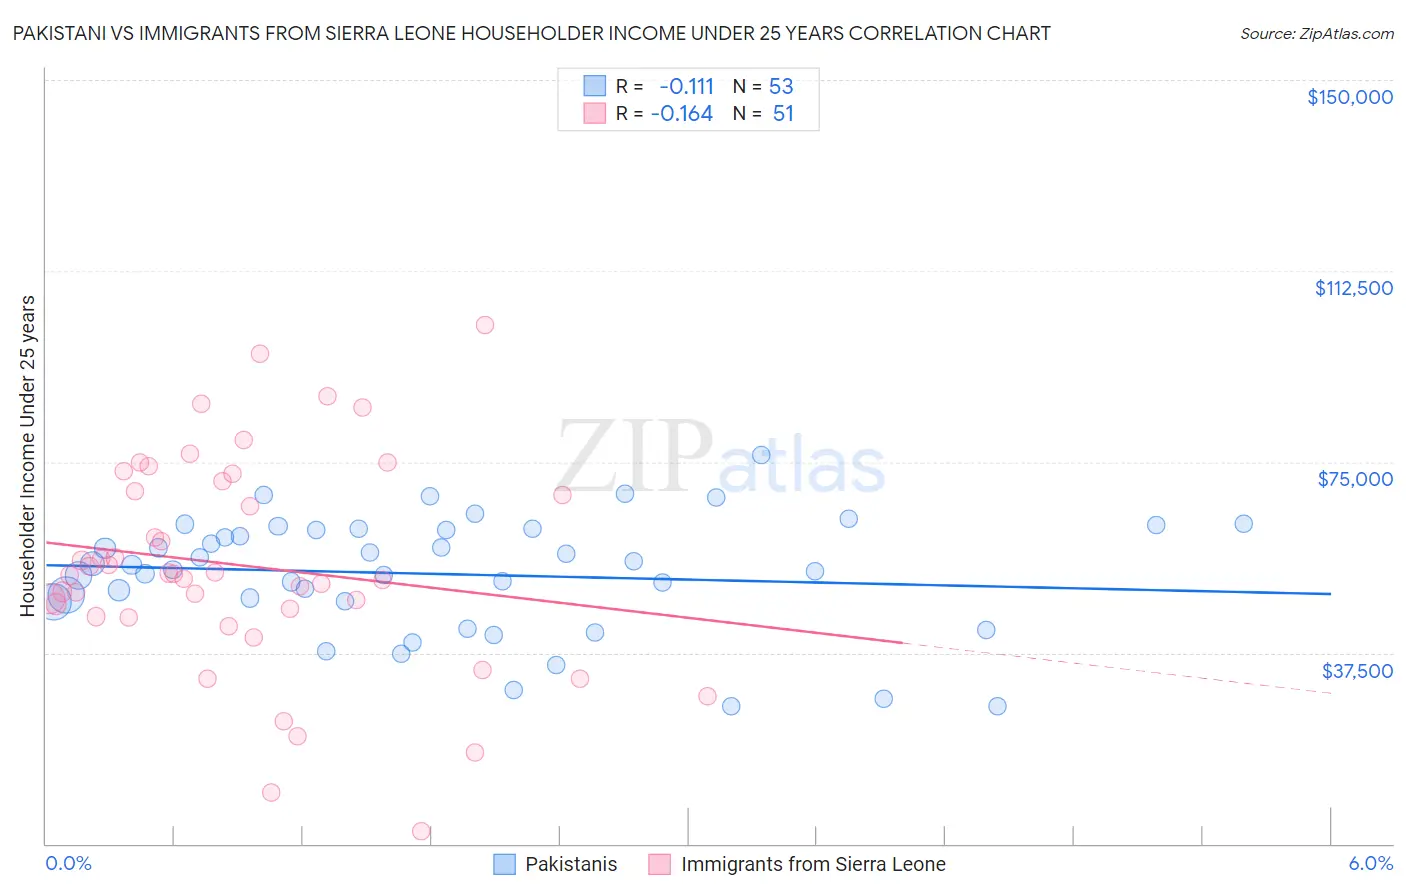 Pakistani vs Immigrants from Sierra Leone Householder Income Under 25 years